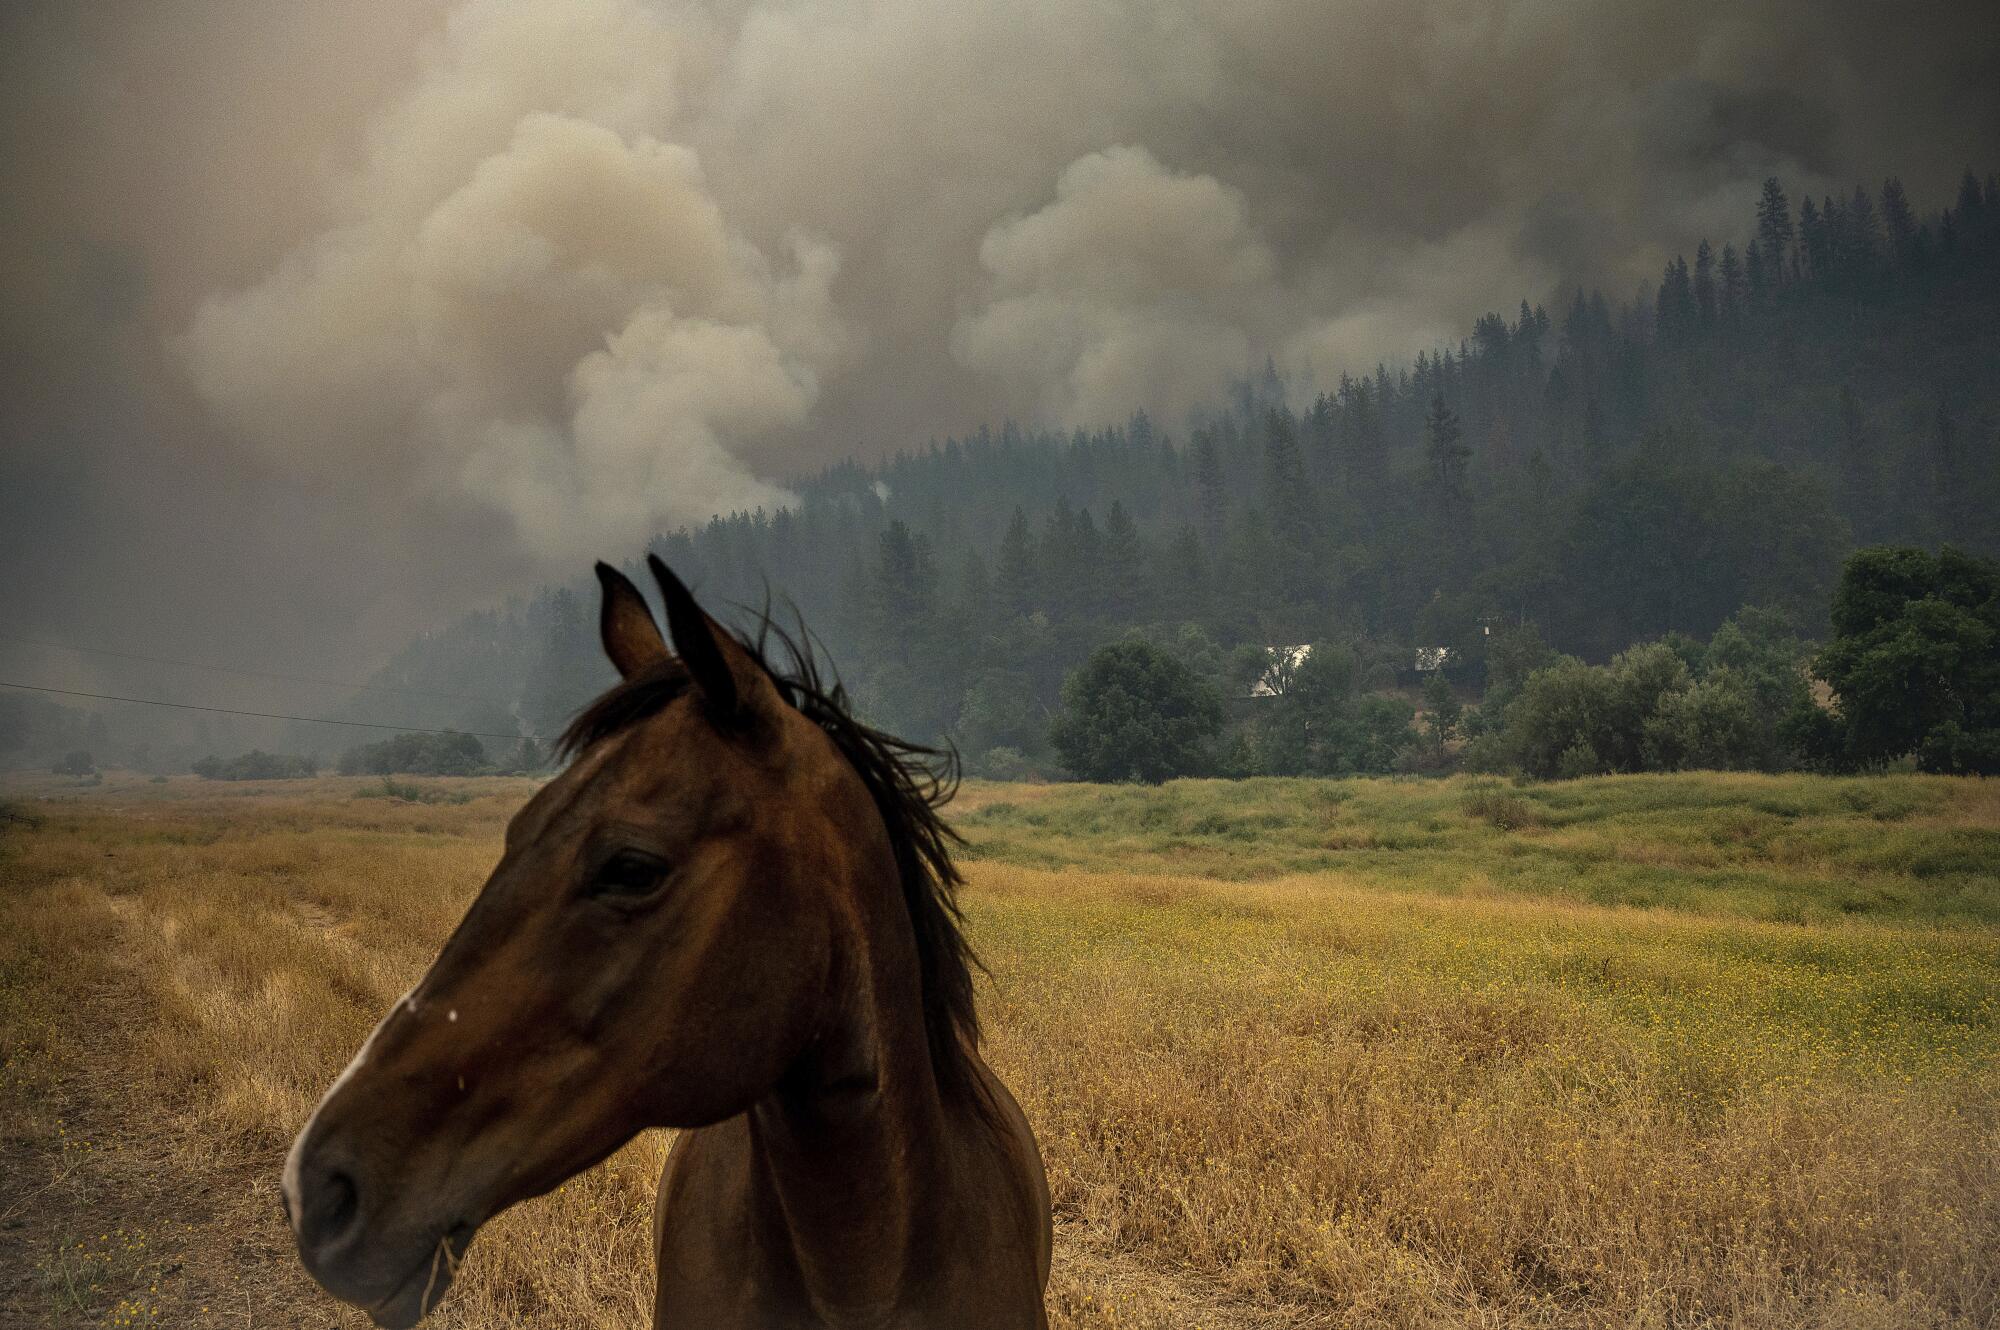 A horse looks up from grazing in a field with wildfire smoke in the background.